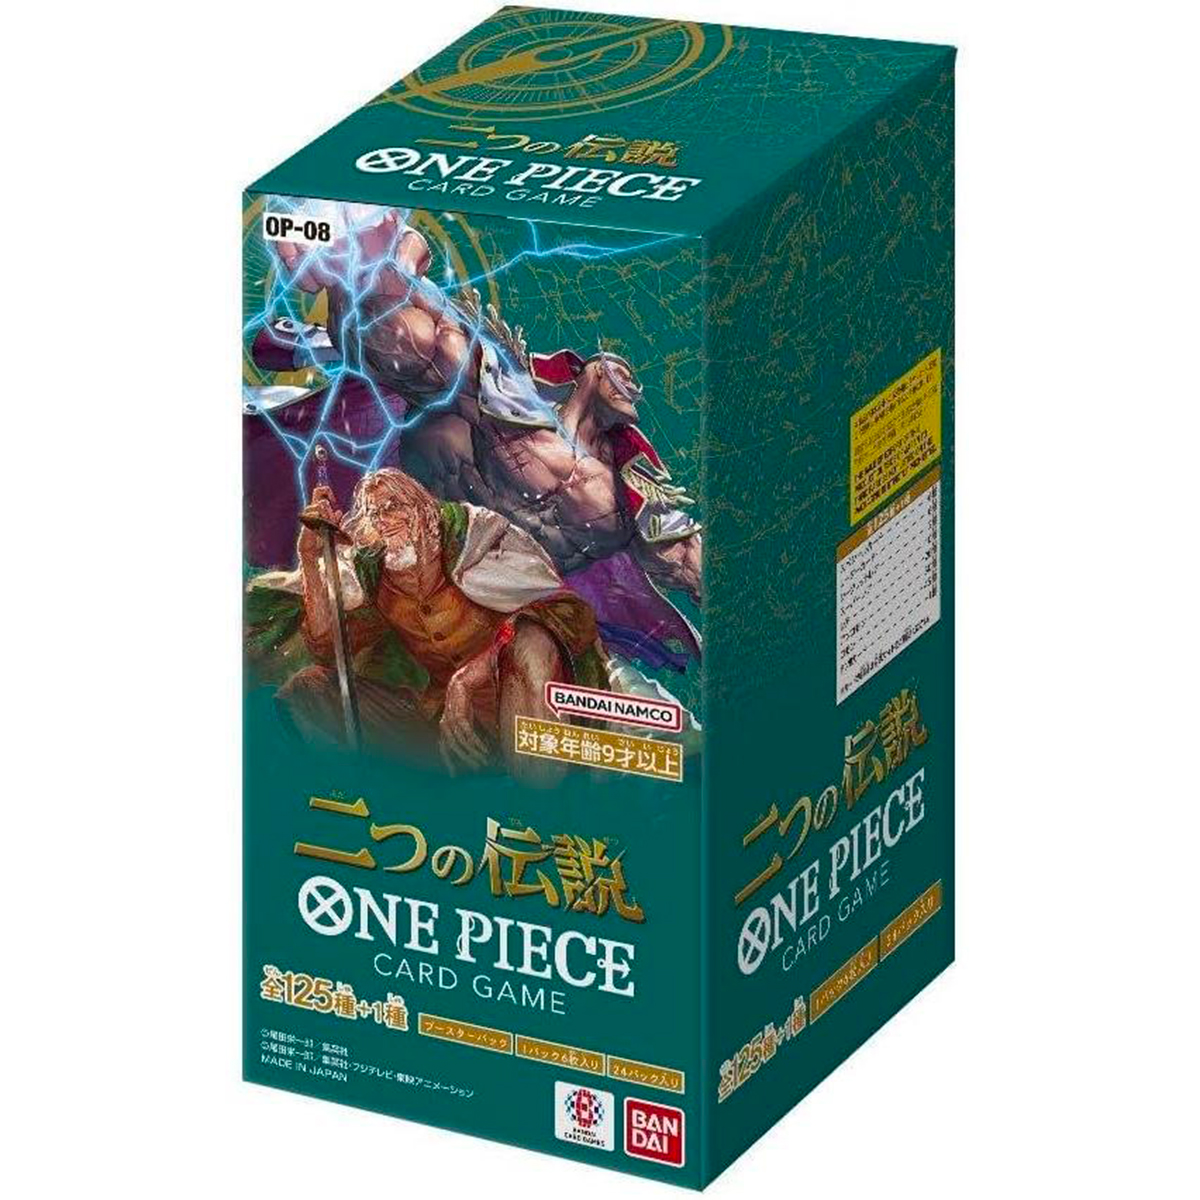 one piece card game - two legends - op-08 - box 24 bustine (jap)